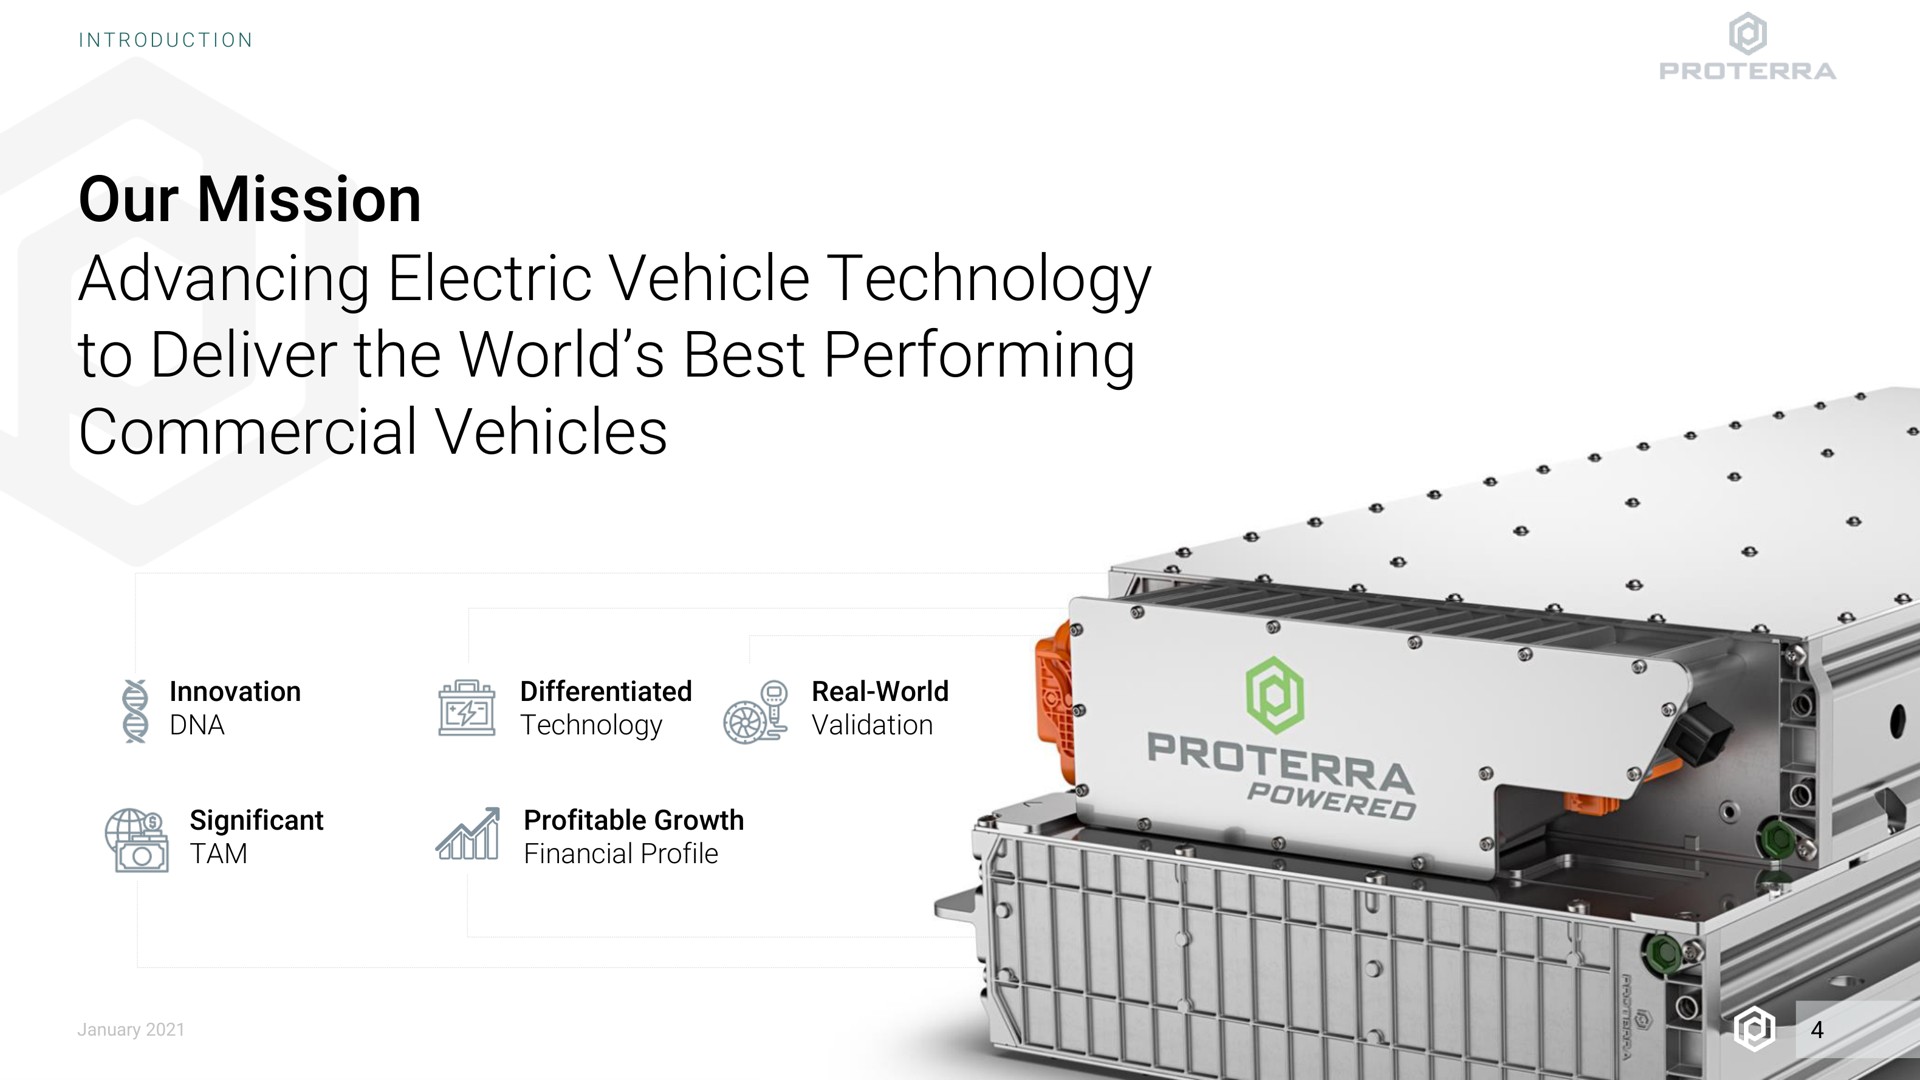 our mission advancing electric vehicle technology to deliver the world best performing commercial vehicles innovation differentiated real world validation significant tam ani profitable growth financial profile | Proterra